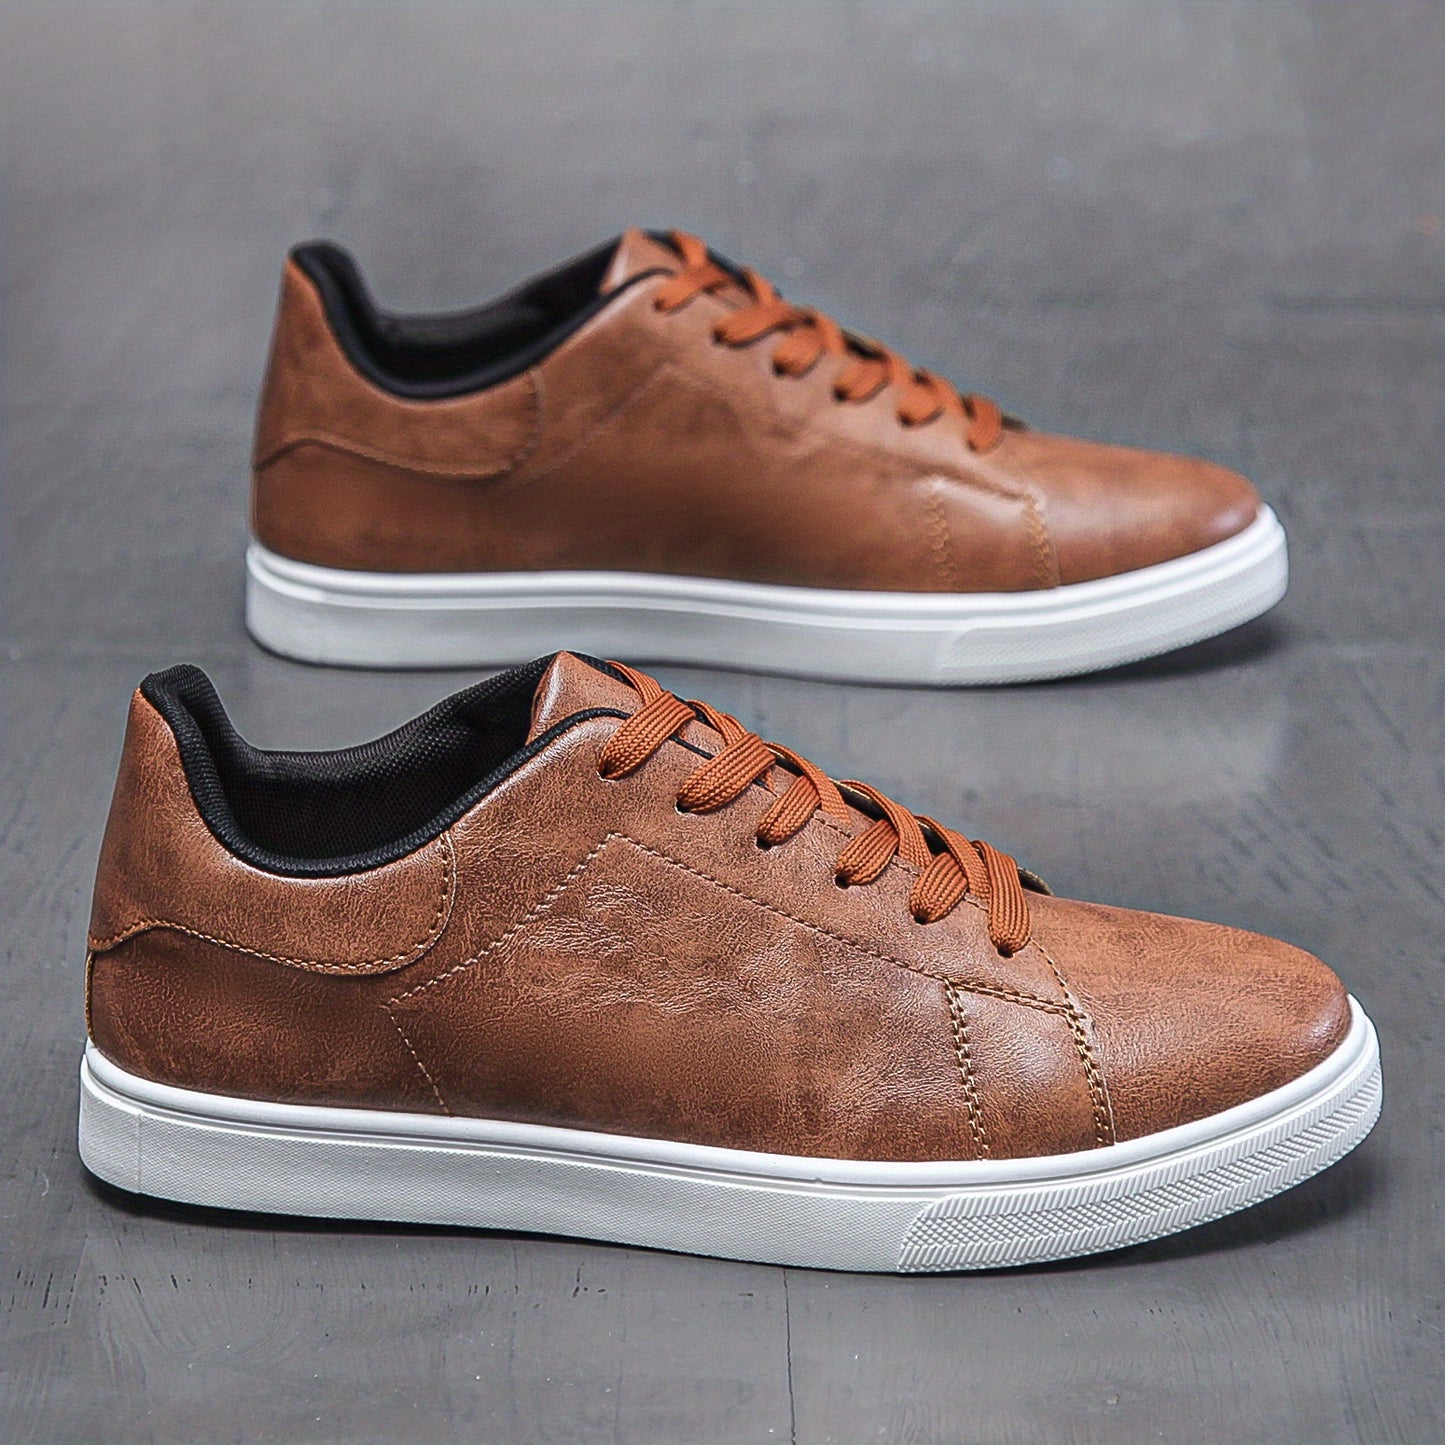 Breathable PU Leather Skate Shoes - Men's Lace-up Sneakers with Good Traction